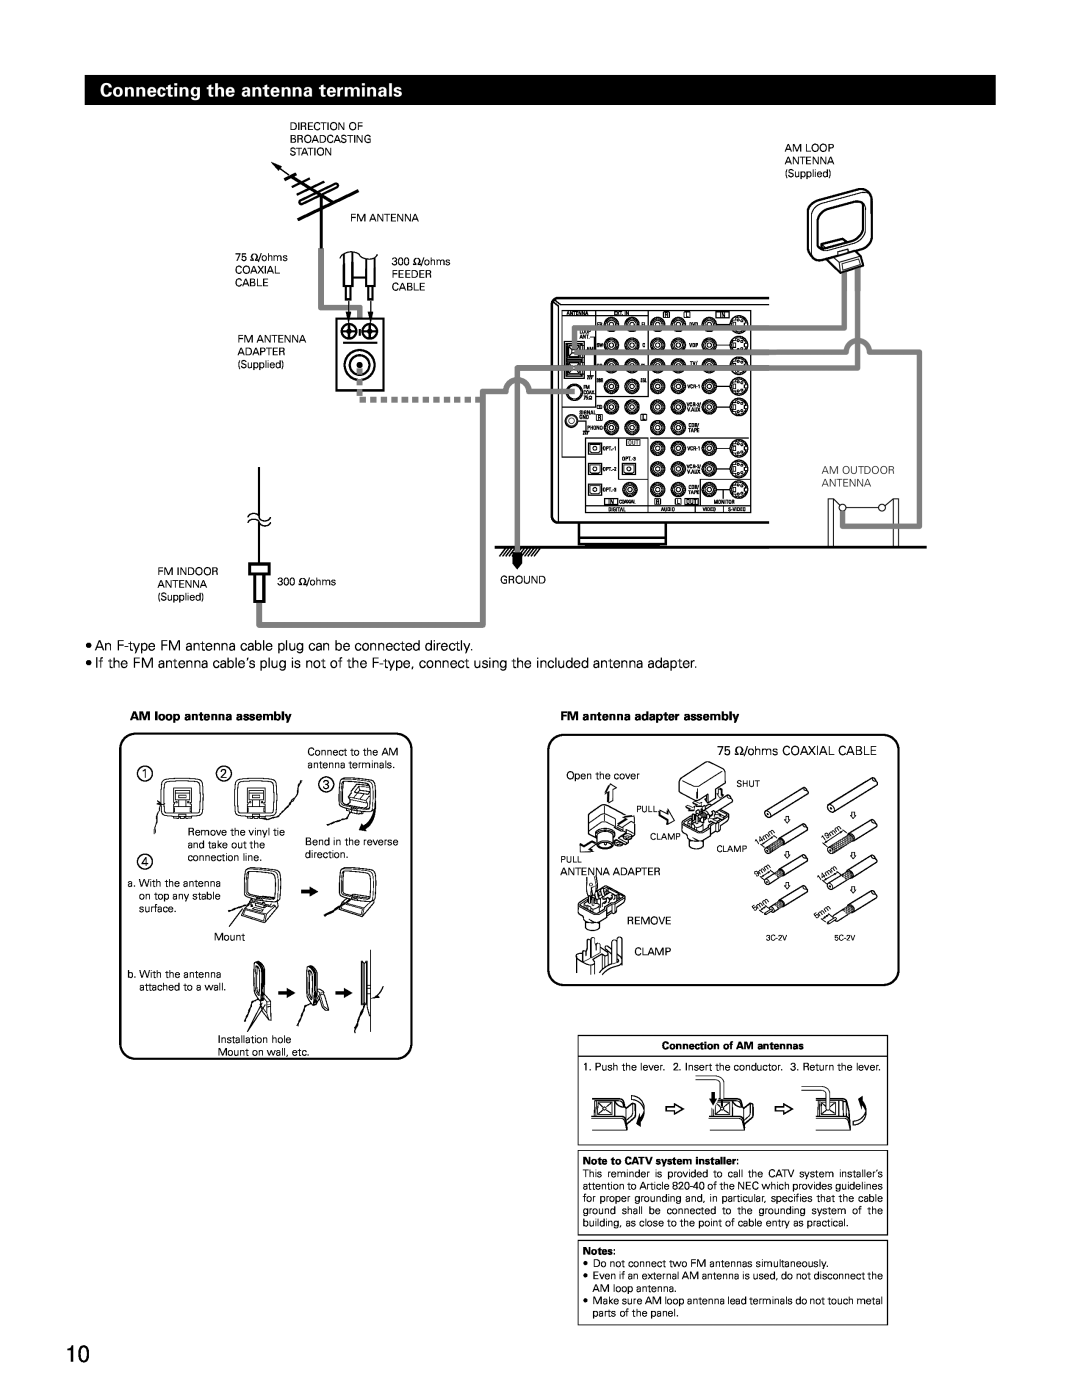 Denon AVR-3802 manual Connecting the antenna terminals, AM loop antenna assembly, FM antenna adapter assembly 